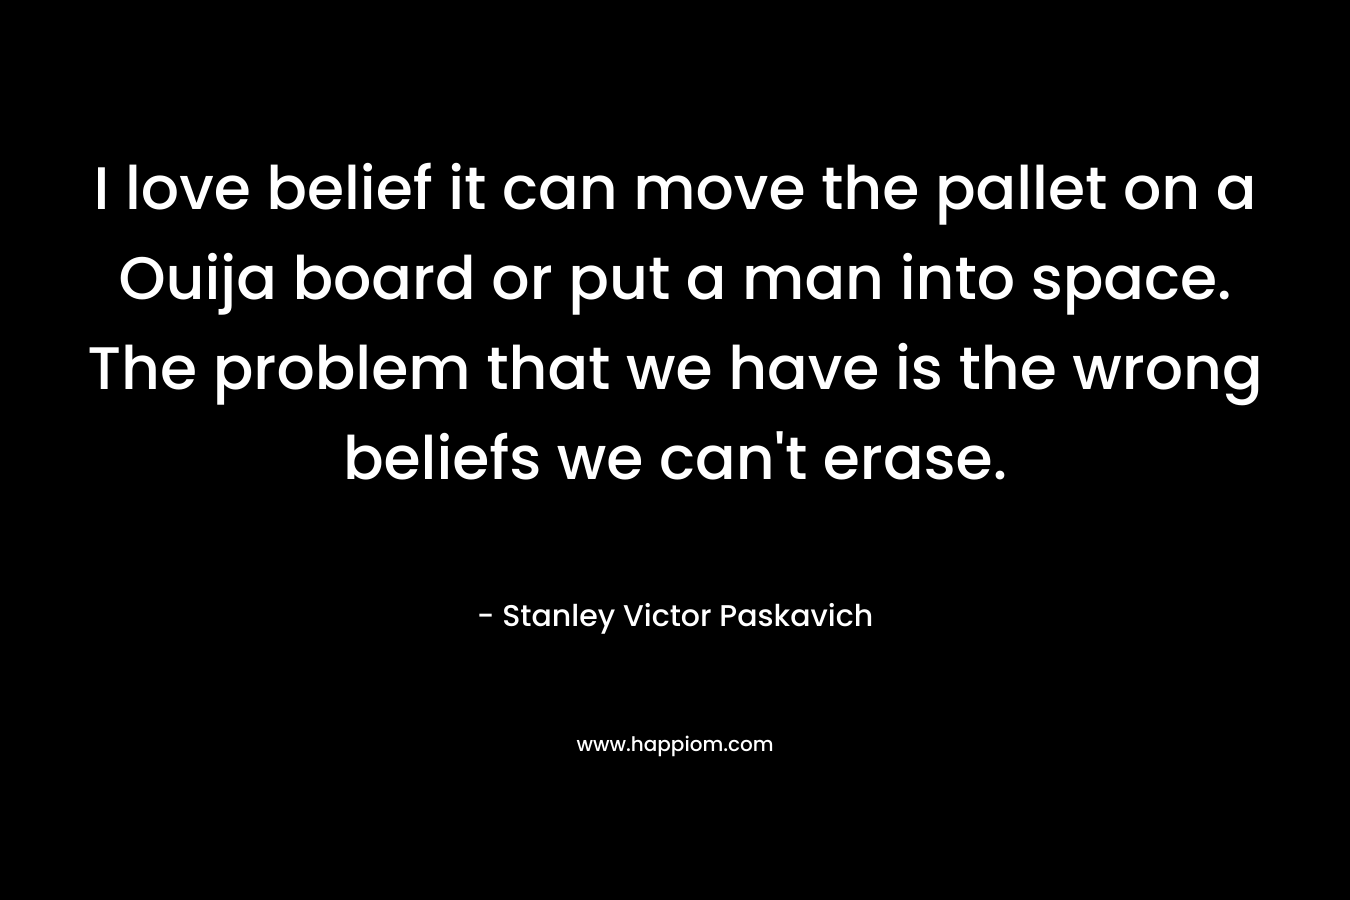 I love belief it can move the pallet on a Ouija board or put a man into space. The problem that we have is the wrong beliefs we can't erase.